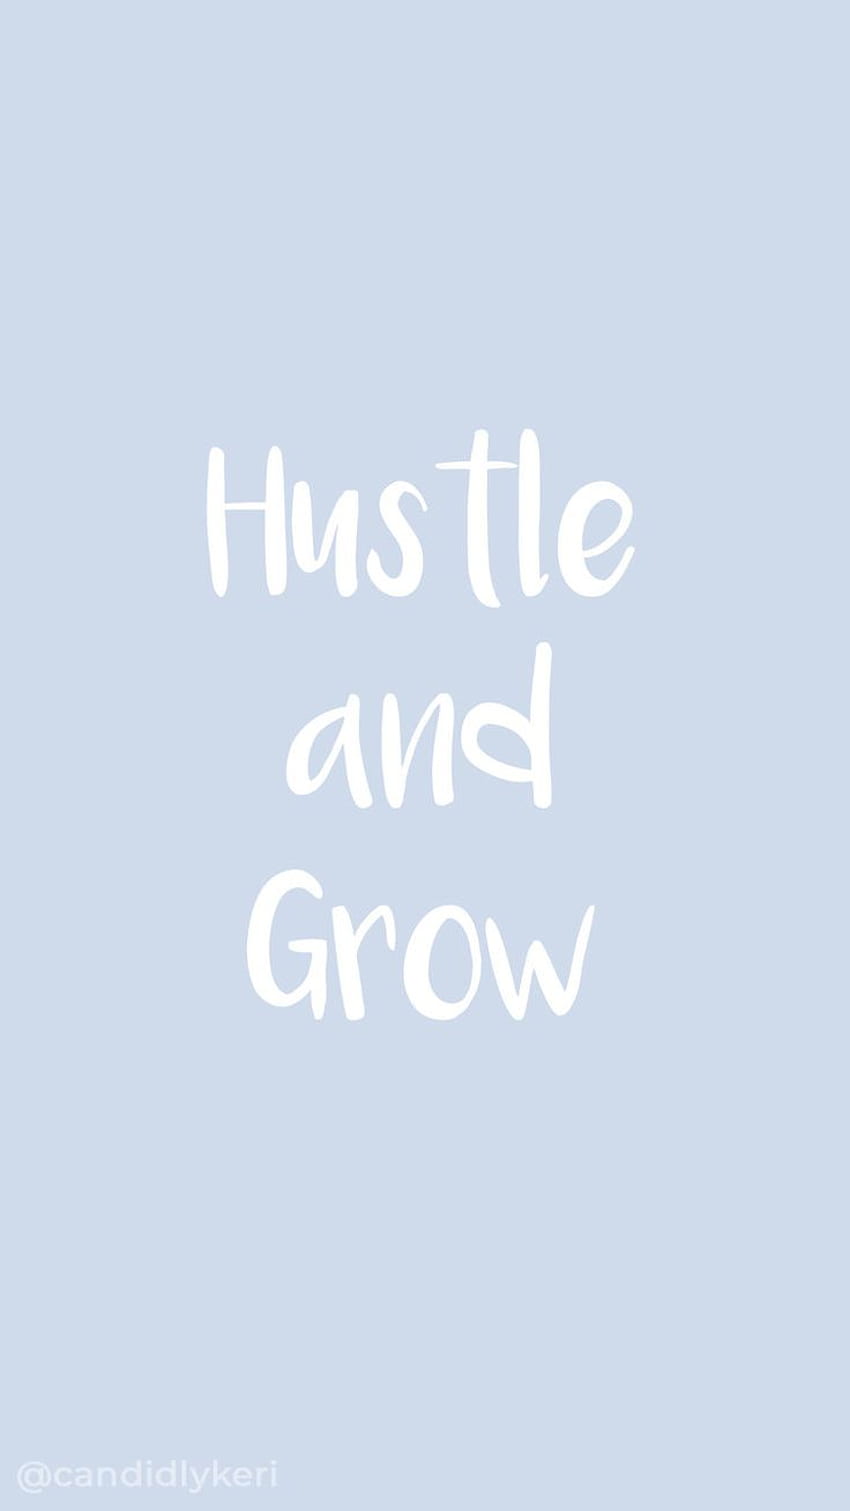 Hustle And Grow blue handwritten font quote inspirational background you can for on. Inspirational background, Blue quotes, Fonts quotes, Girly Hustle HD phone wallpaper